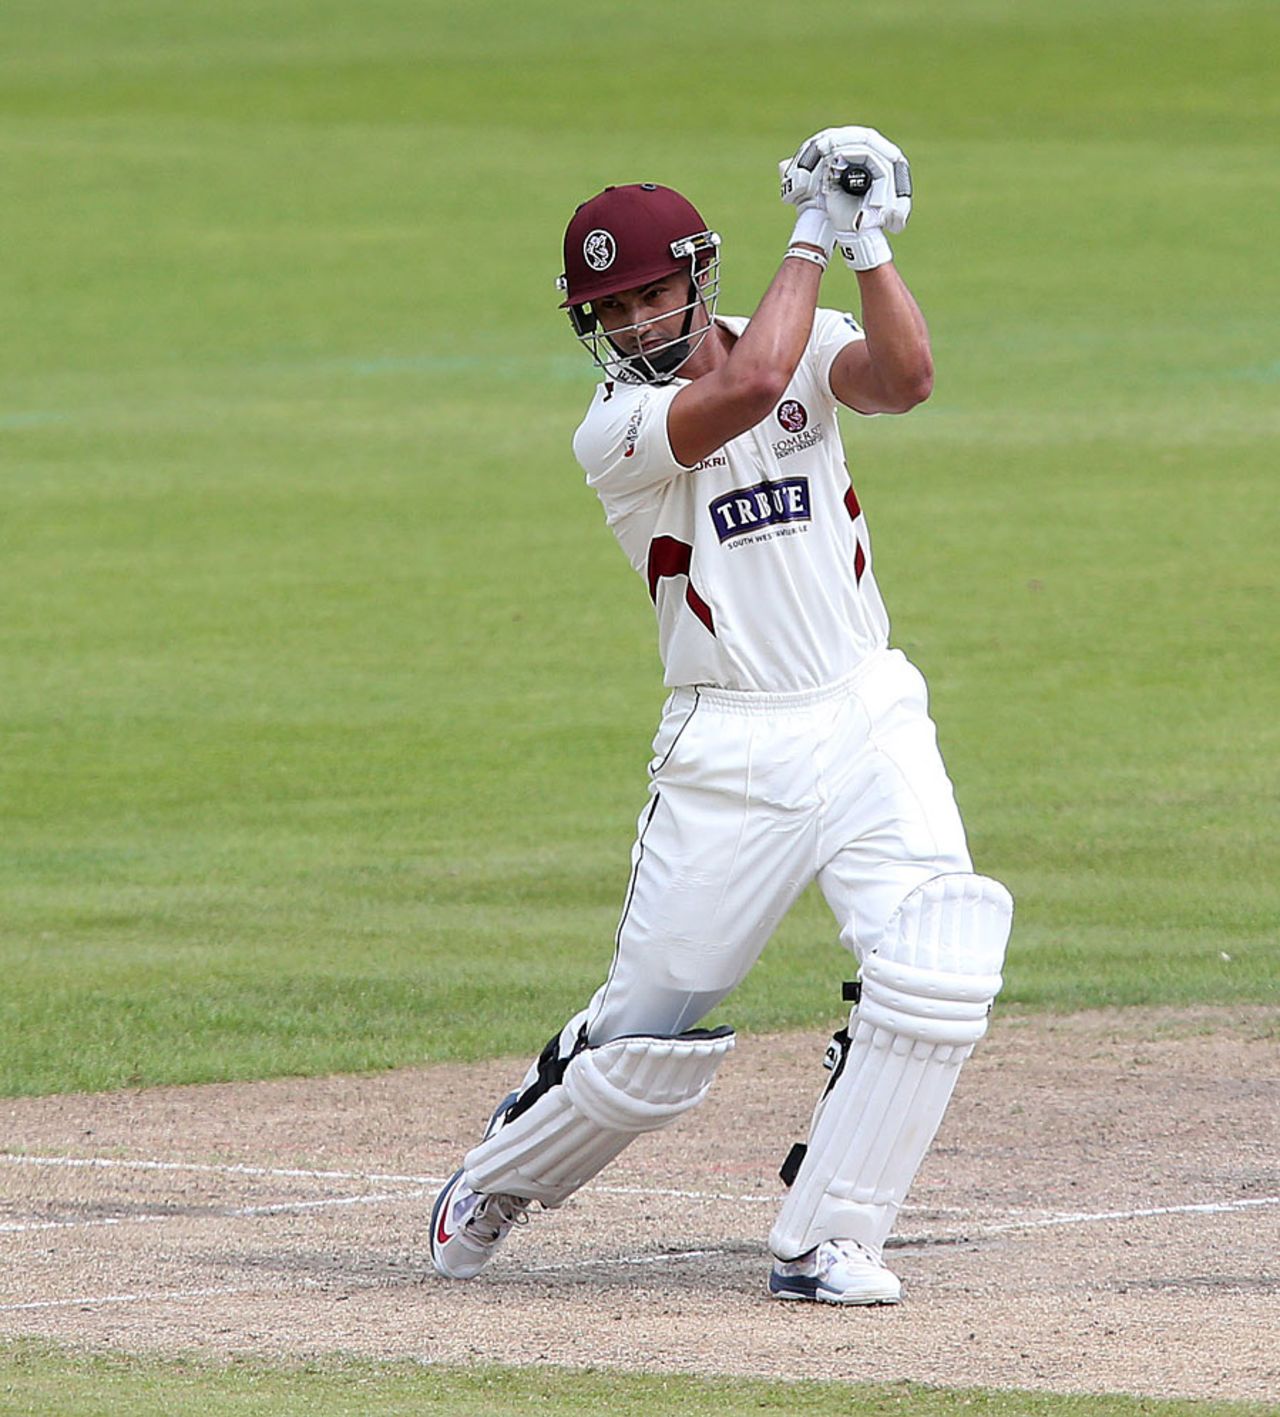 Alviro Petersen took his score to 155, Lancashire v Somerset, County Championship, Division One, Old Trafford, June 2, 2014